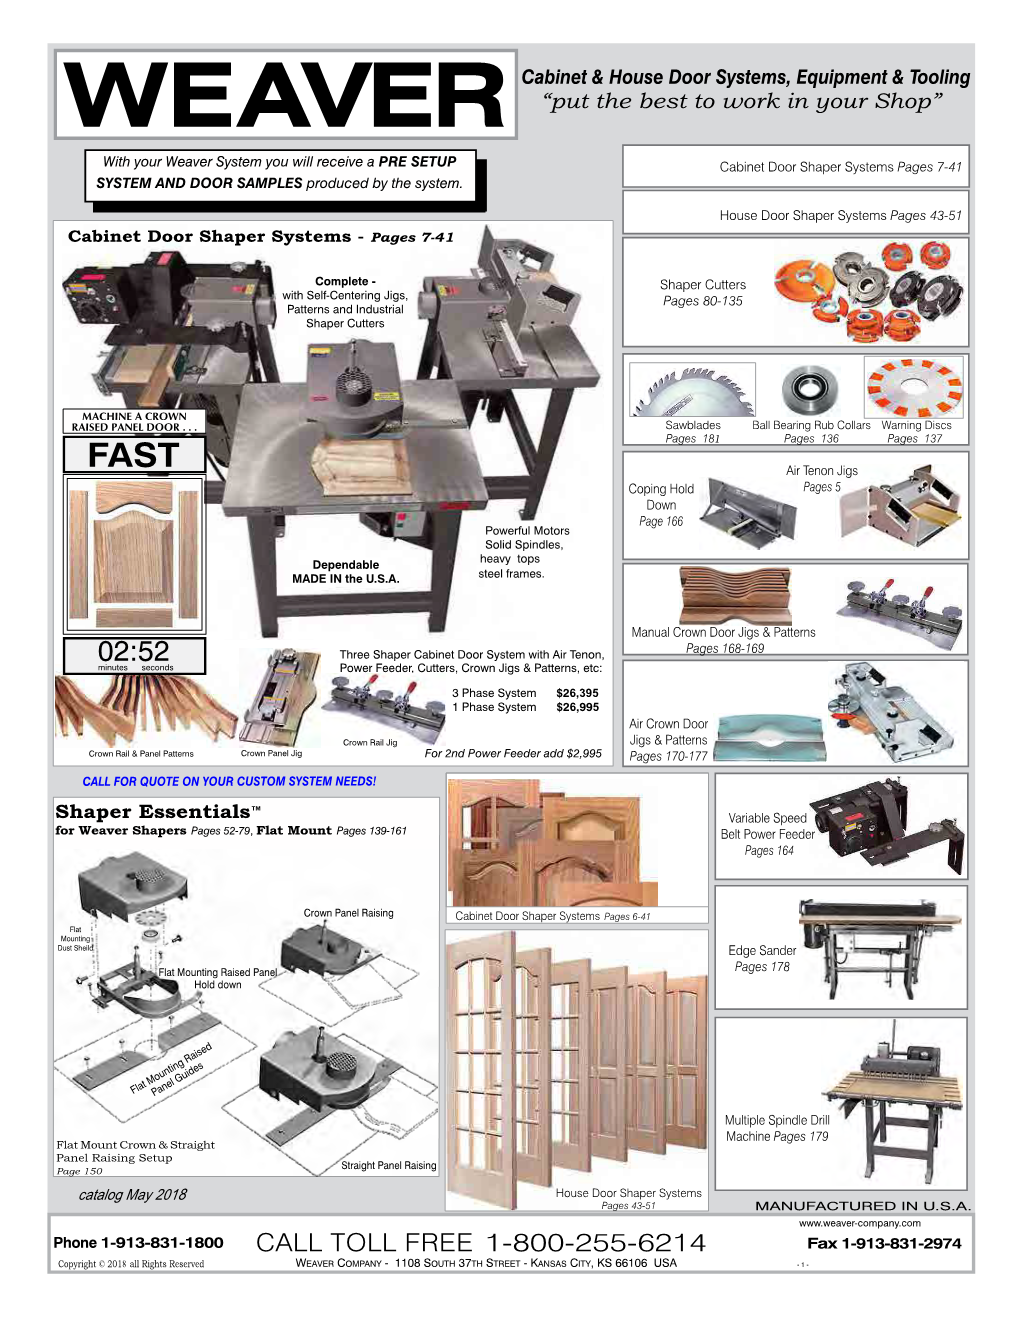 Catalog May 2018 House Door Shaper Systems Pages 43-51 MANUFACTURED in U.S.A